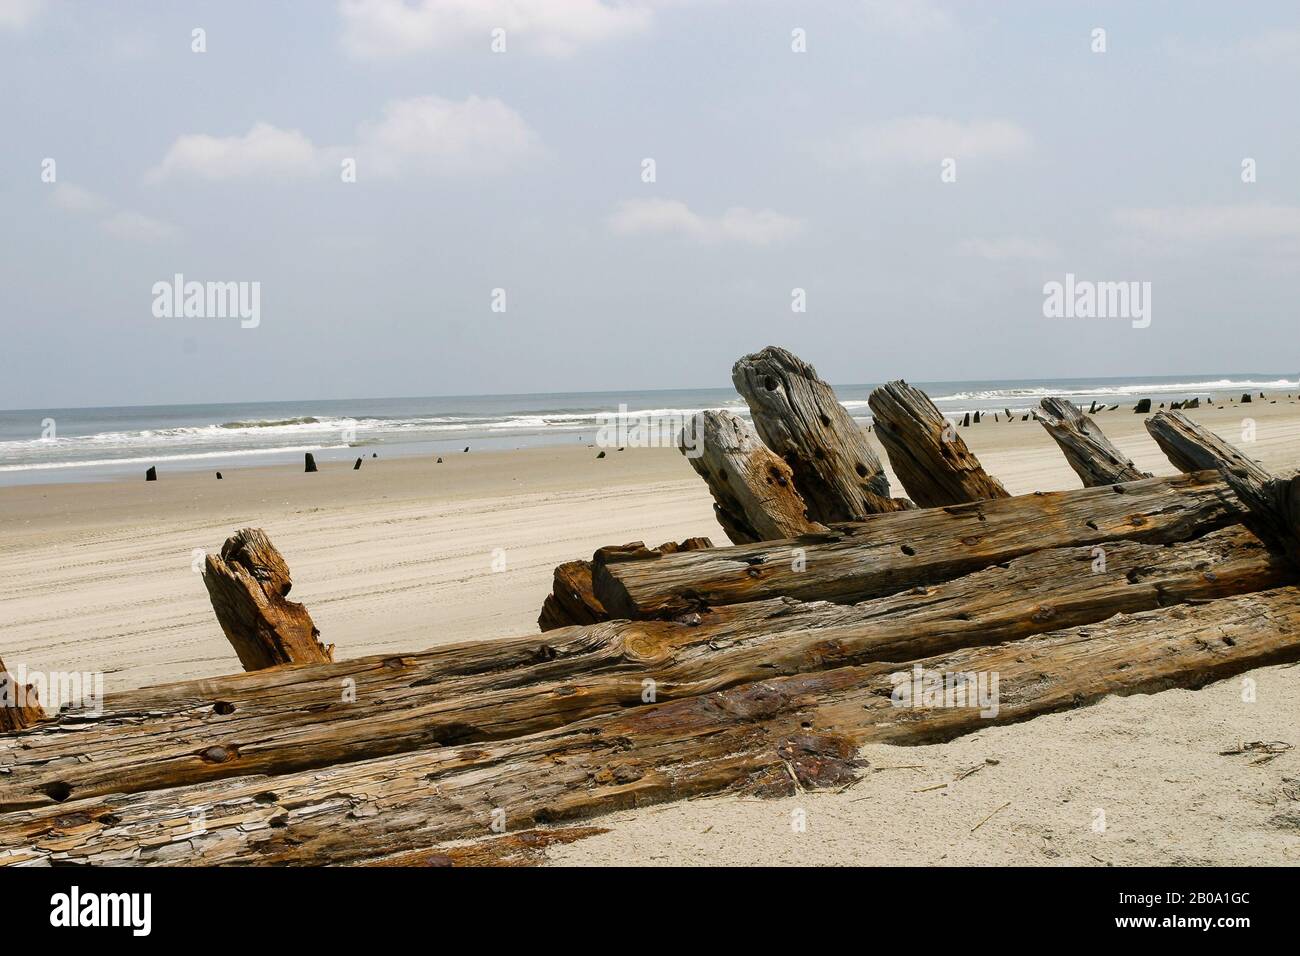 Relic, old wooden shipwreck hull uncovered on beach. Stock Photo